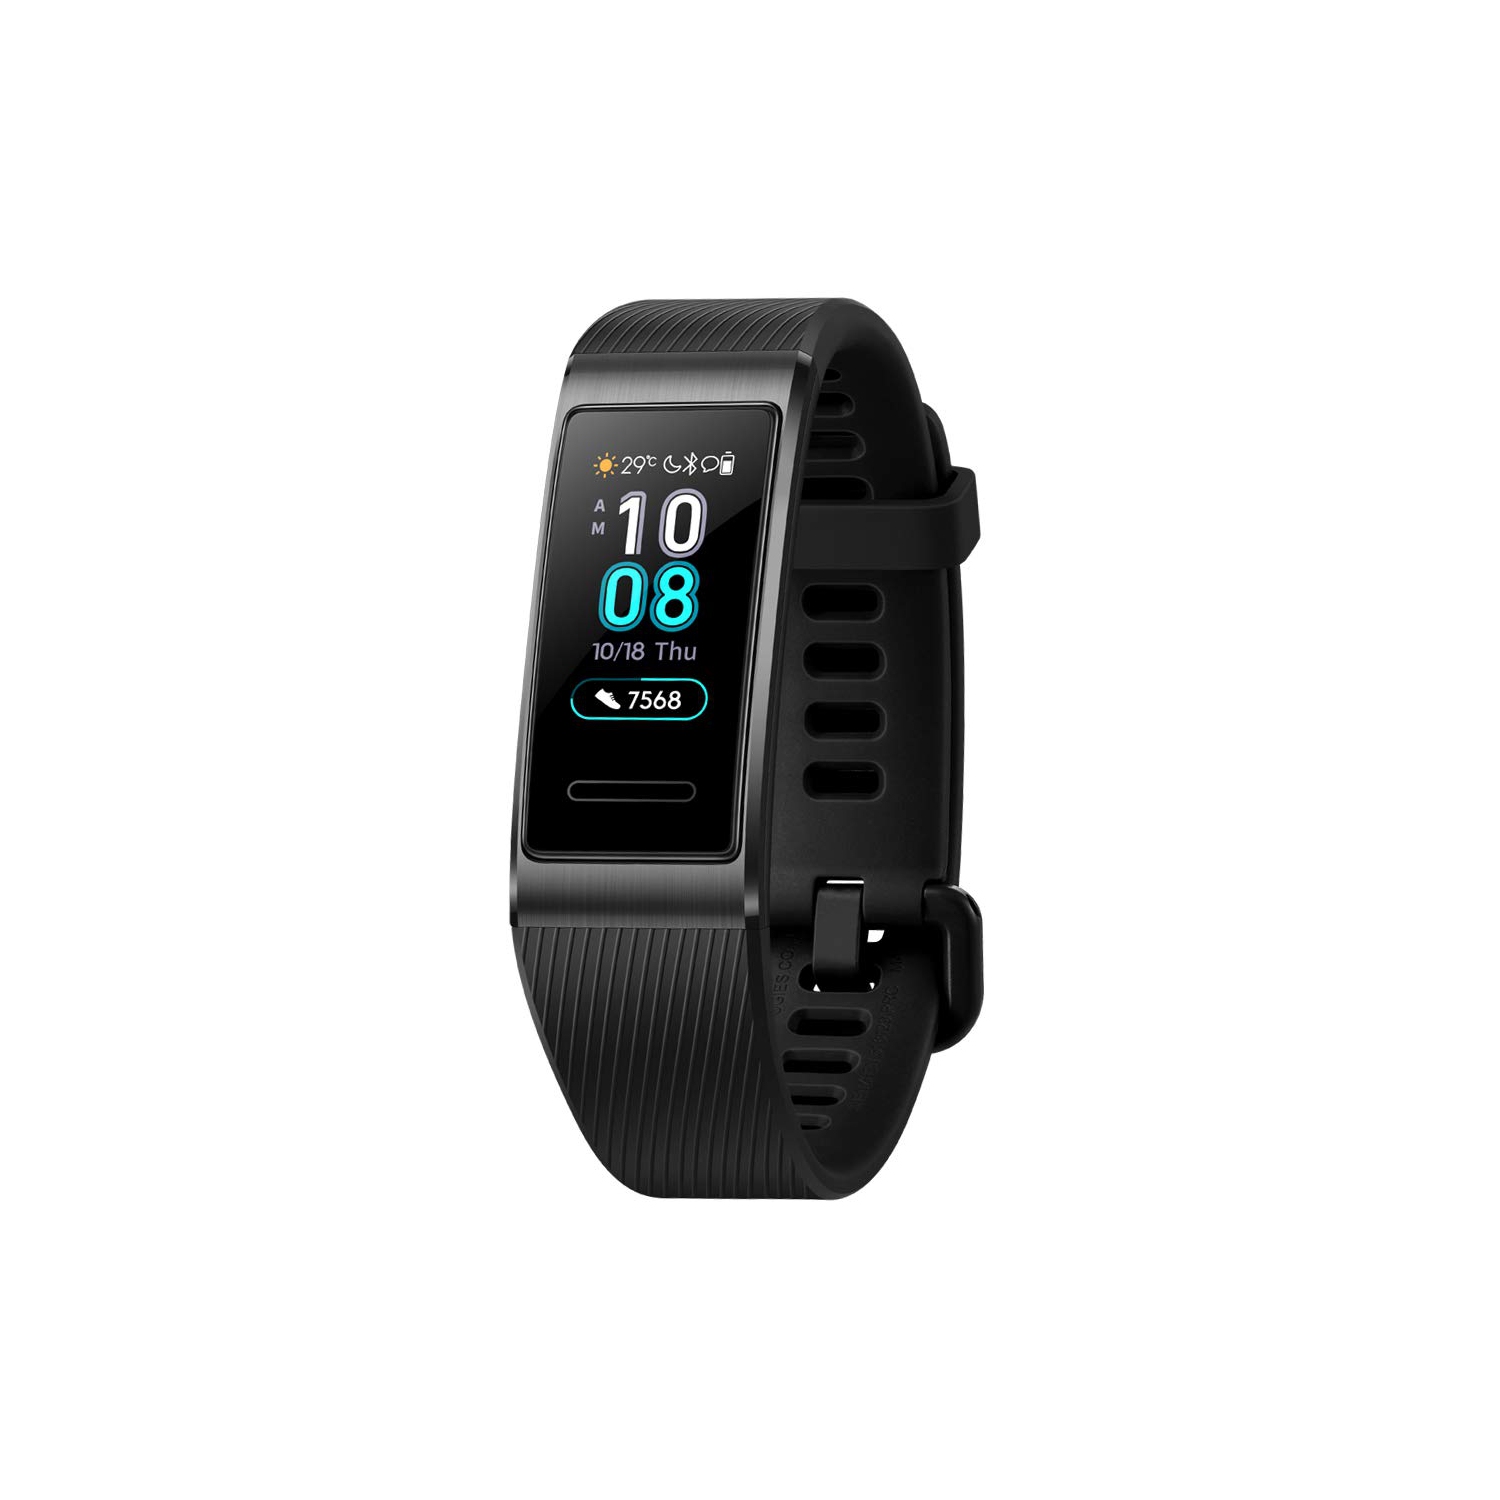 Huawei Band 3 Pro All-in-One Fitness Activity Tracker(Black, One Size)